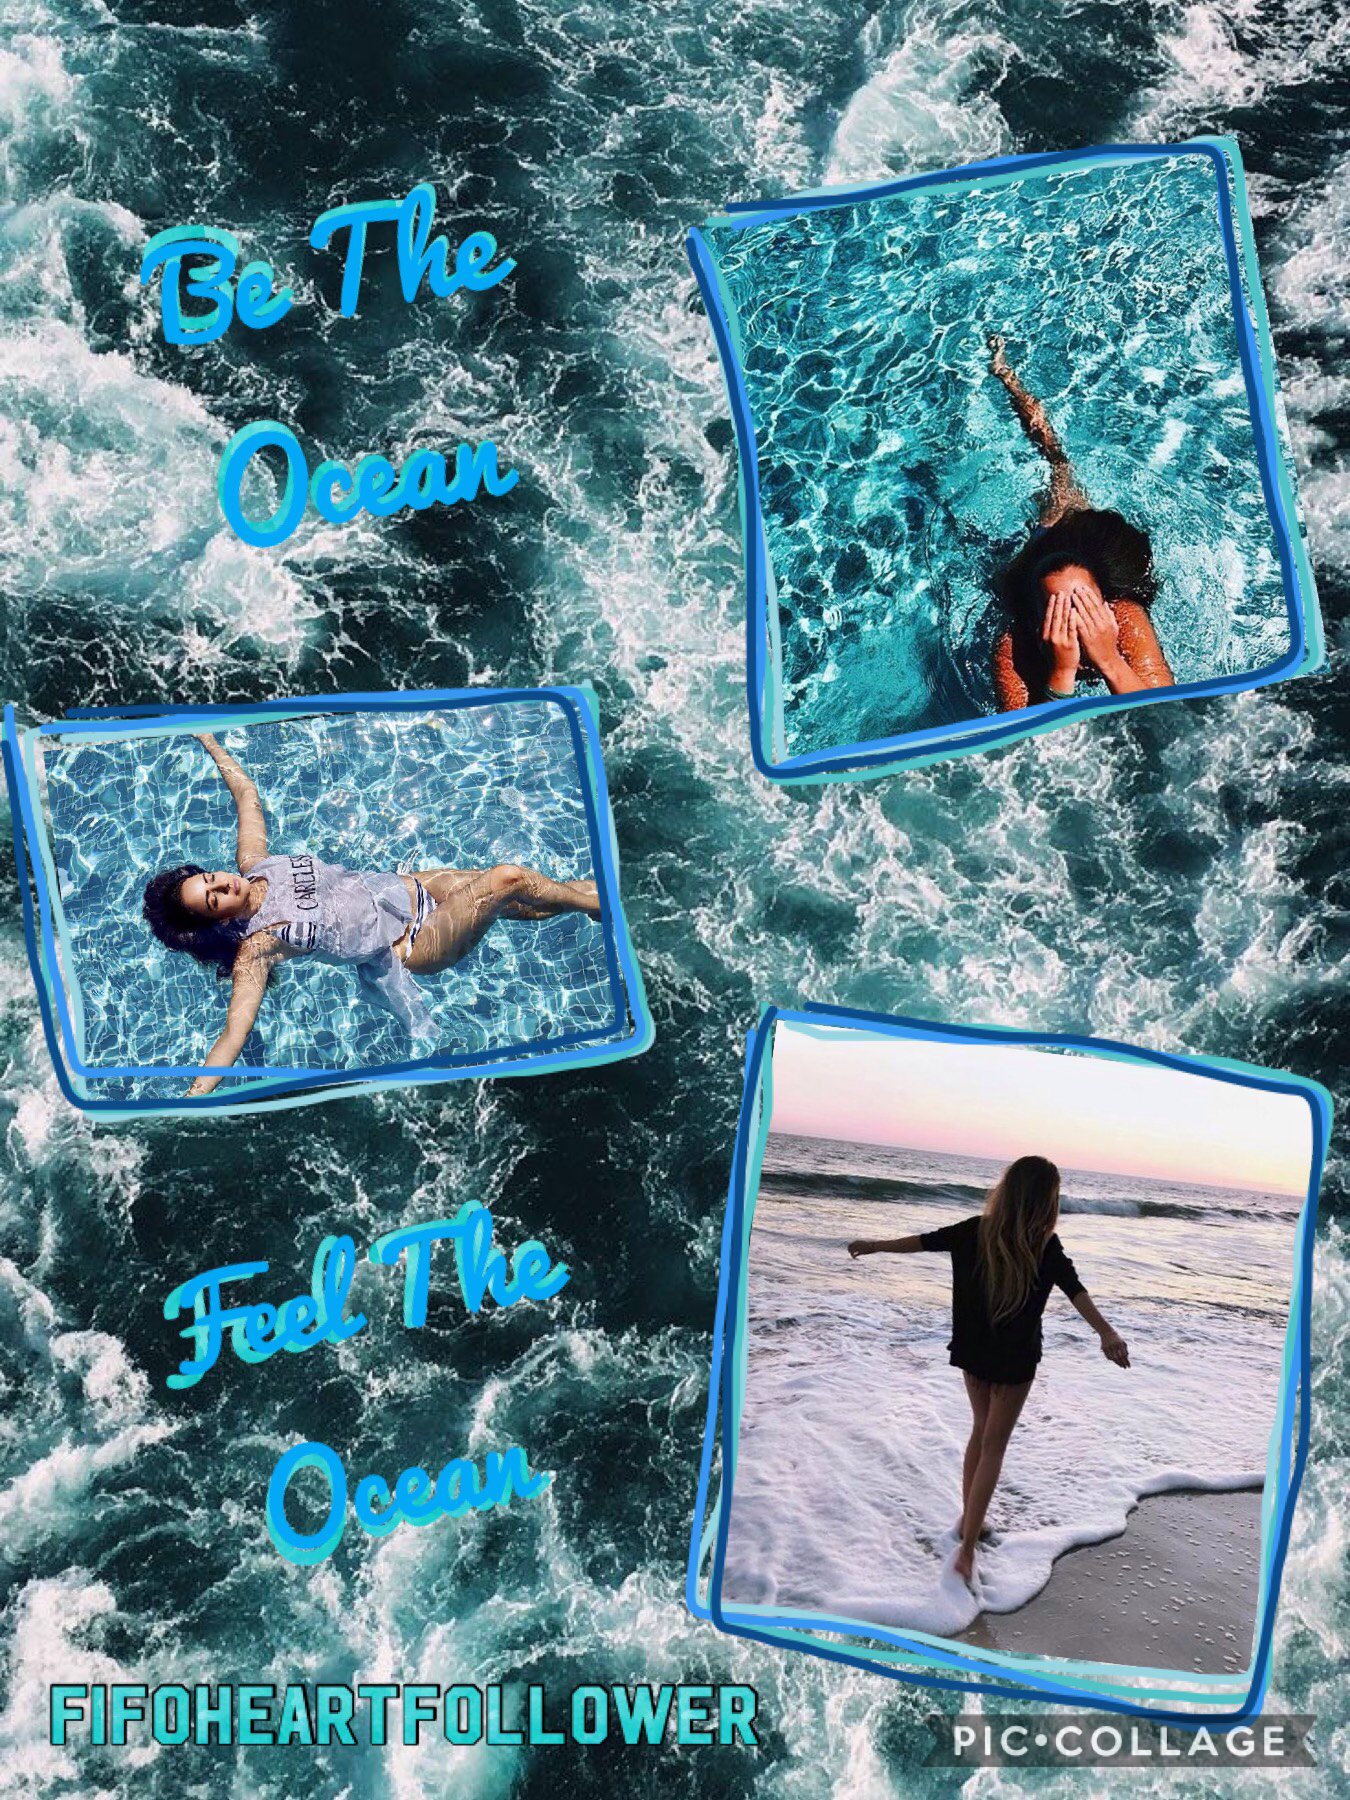                                    My newest quote!!❤️🏖